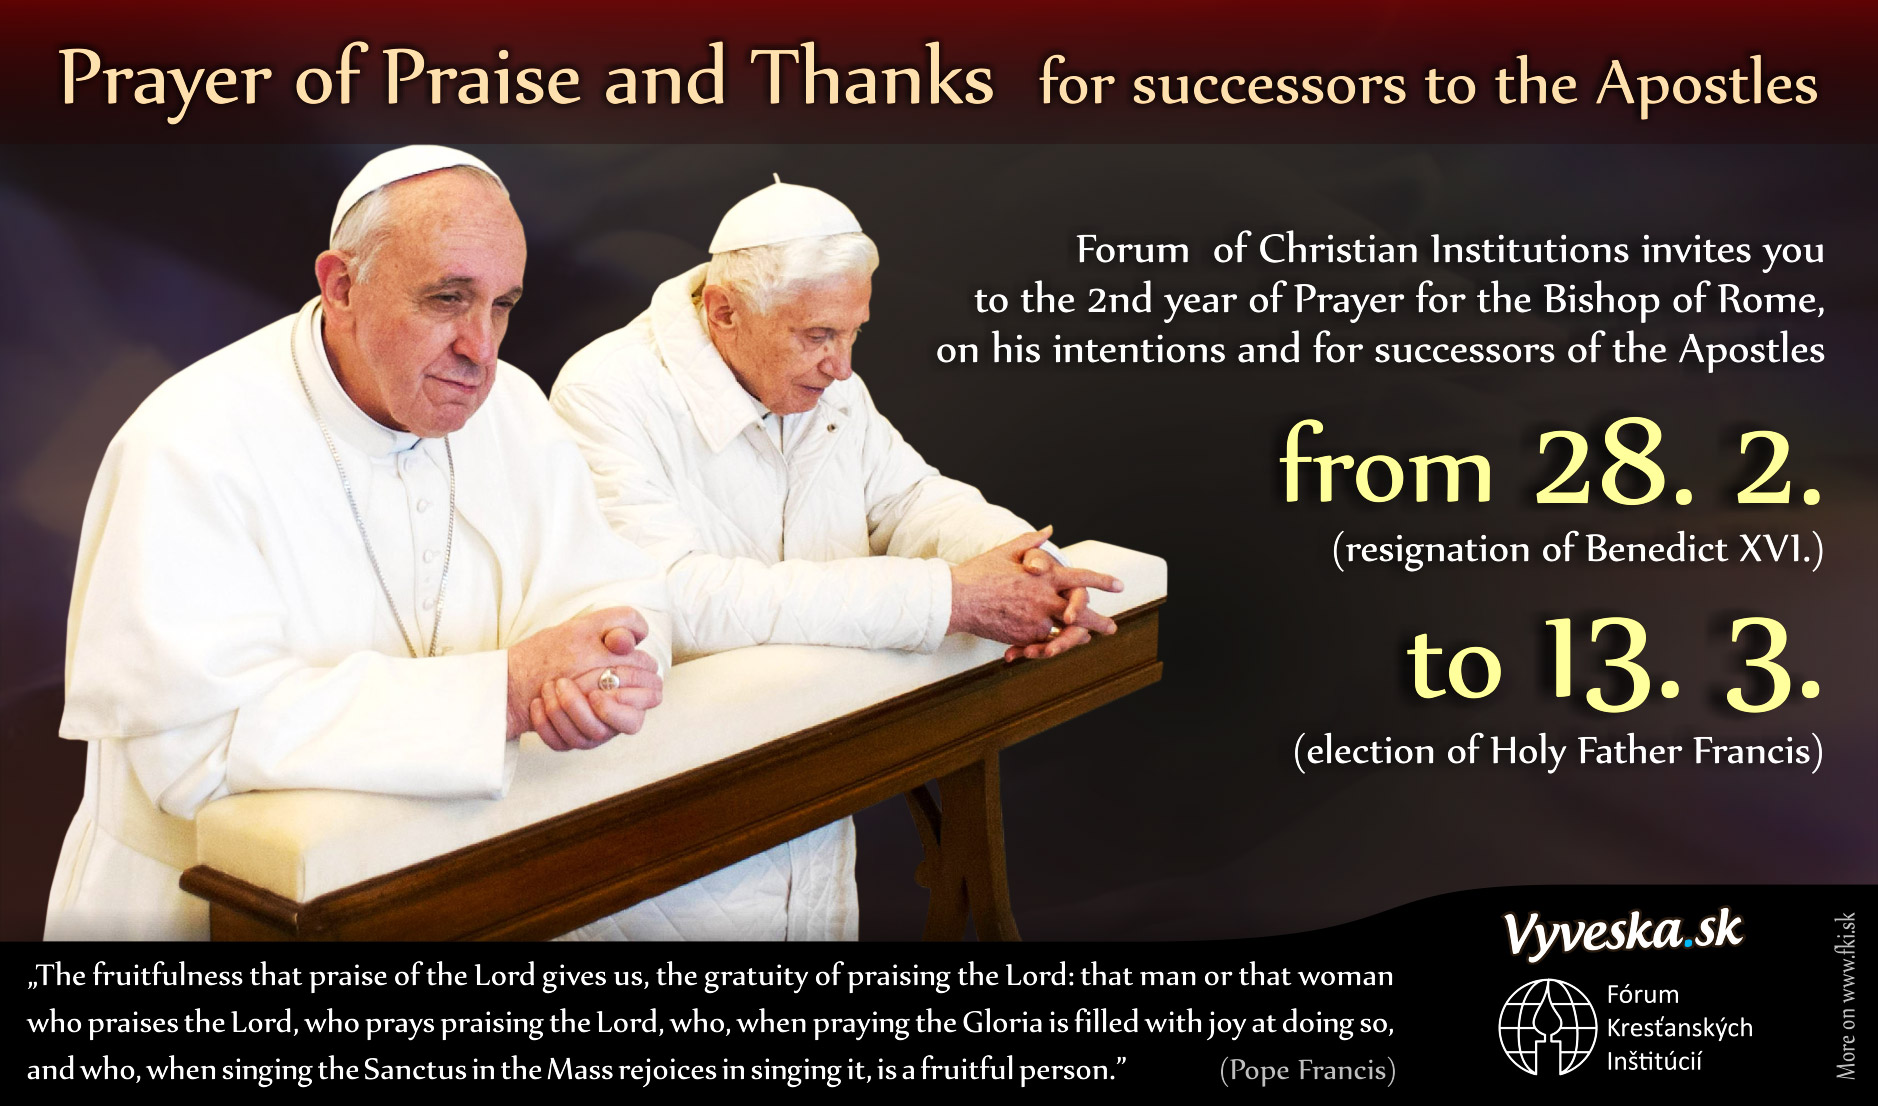 Prayer of praise and thanks for the successors of the Apostles